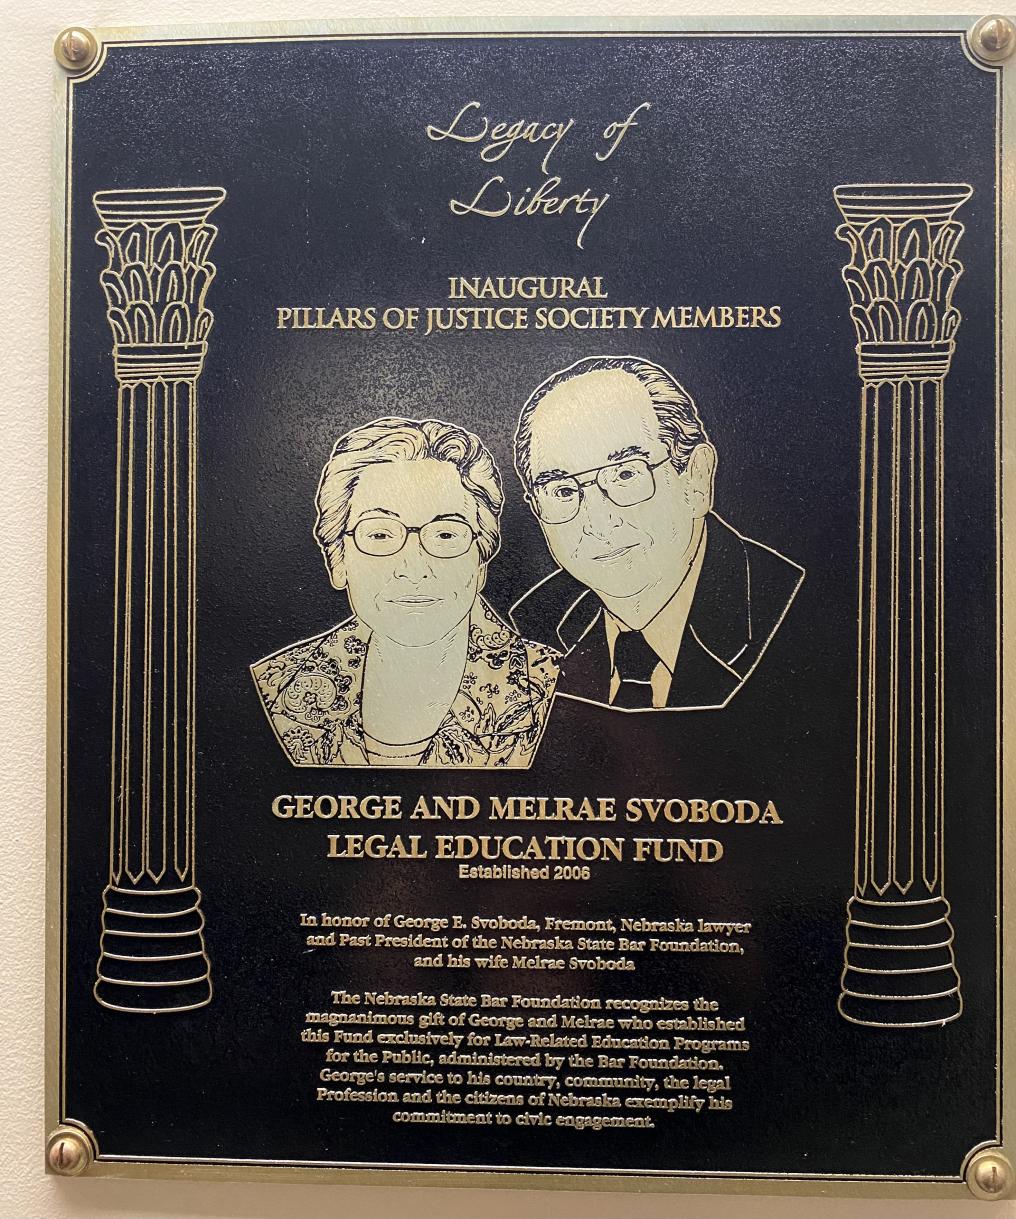 George and Melrae Svoboda plaque in the Hruska Law Center